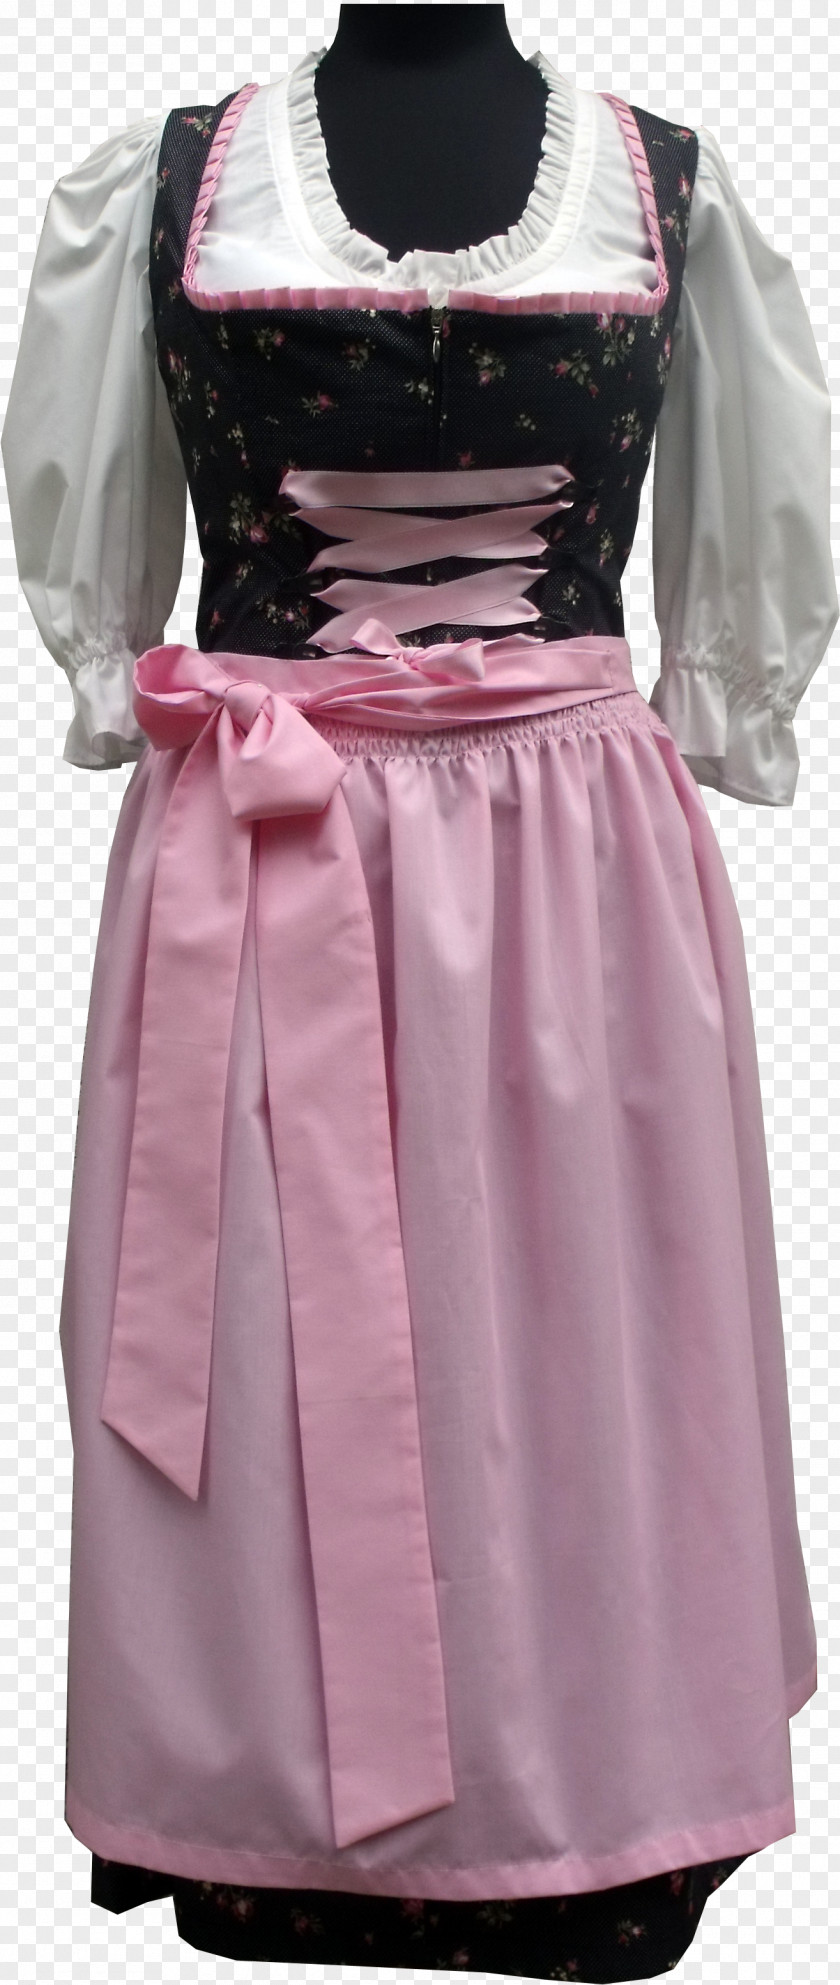 Pathway Cocktail Dress Clothing Folk Costume PNG